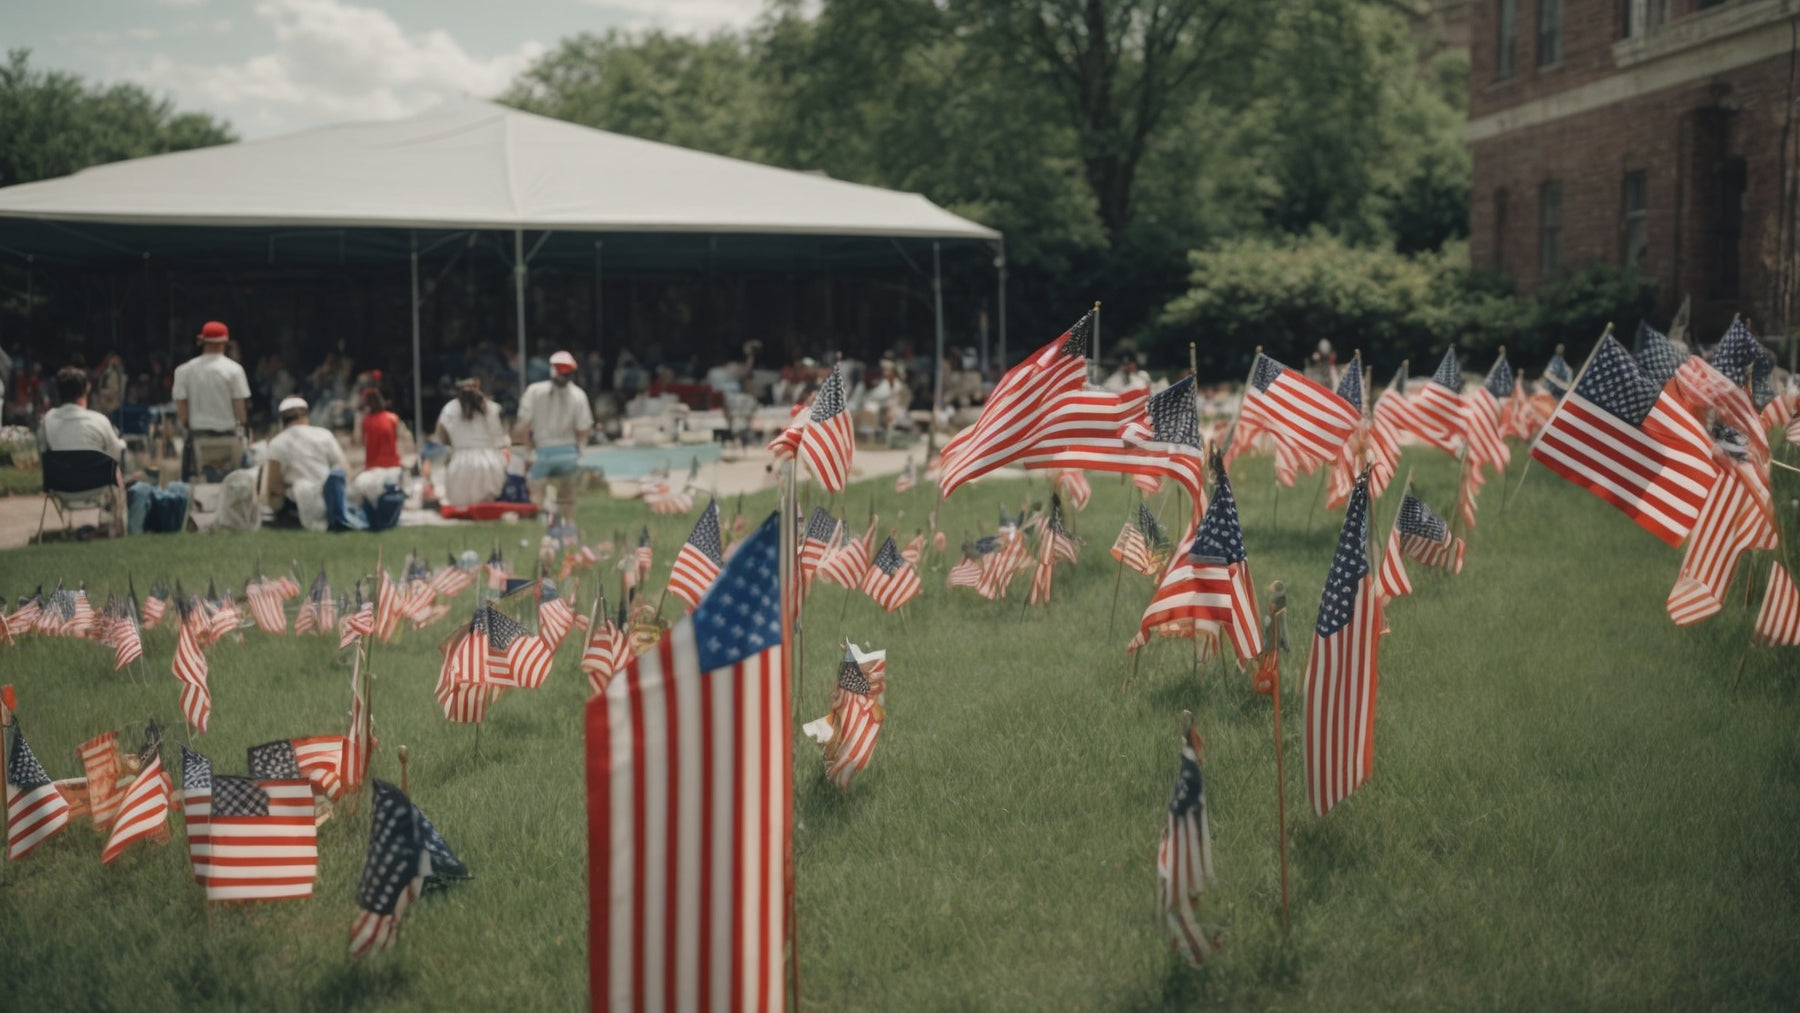 Top 10 Memorial Day Activities for a Meaningful Holiday